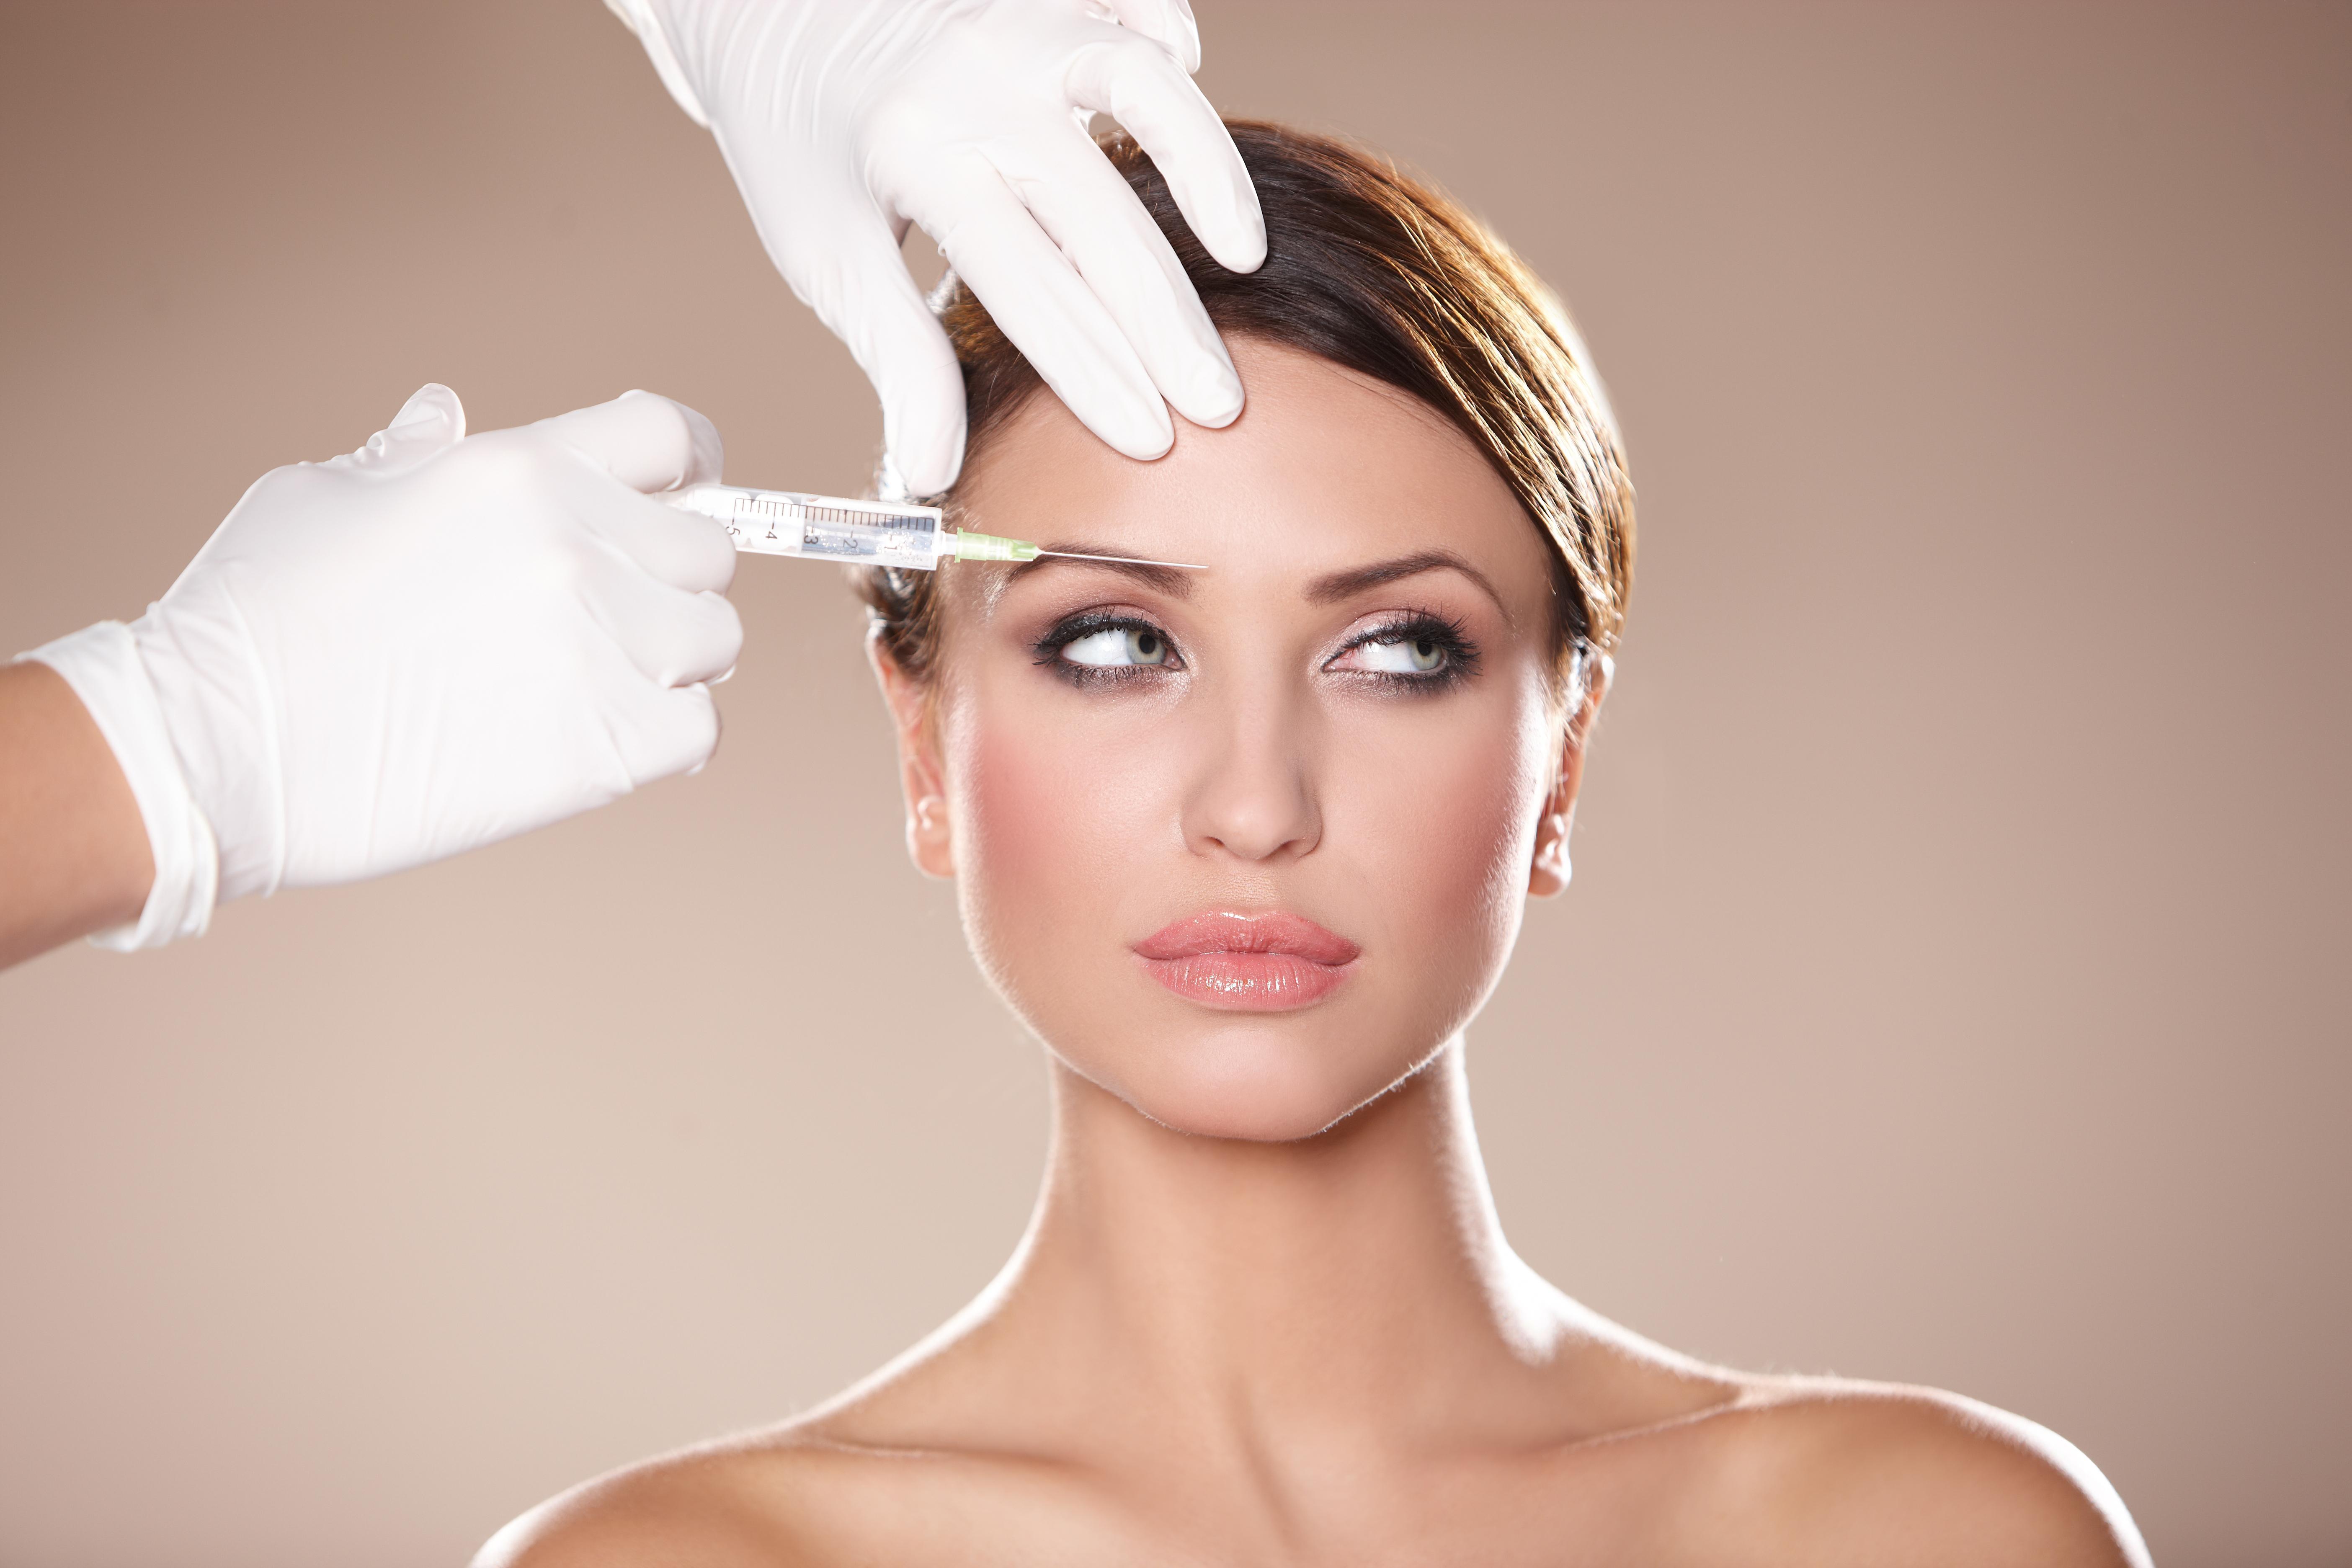 What things to consider then getting Botox?